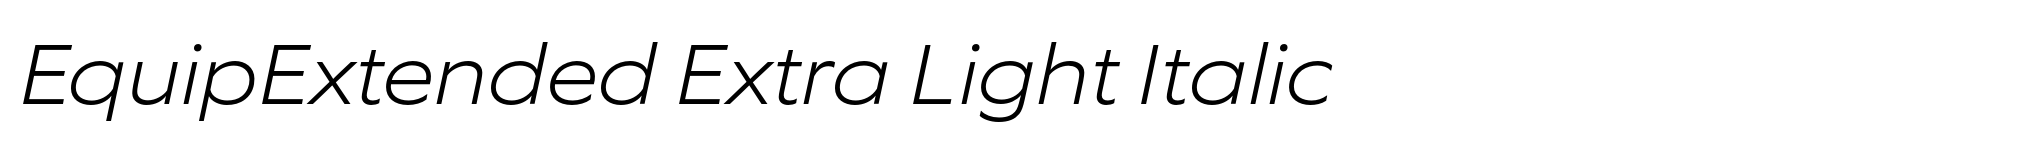 EquipExtended Extra Light Italic image